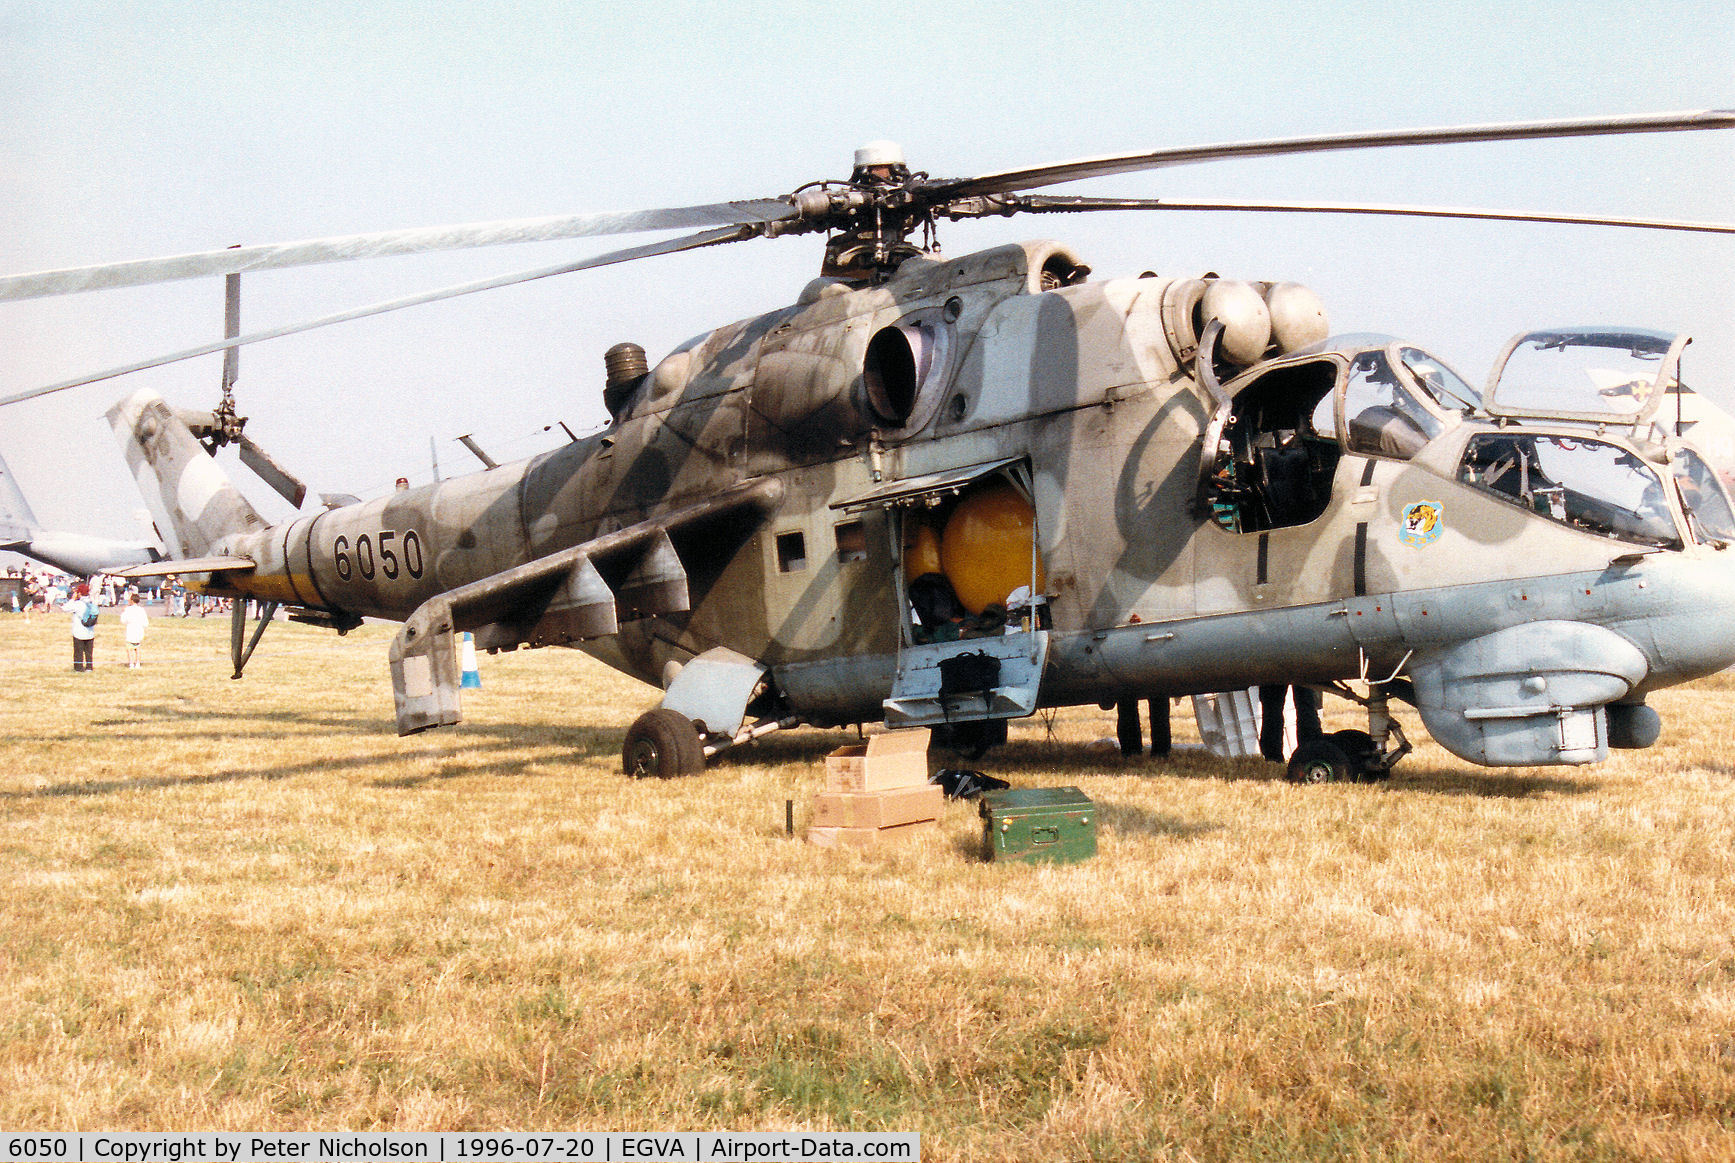 6050, Mil Mi-24DU Hind C/N 7306050, Mi-24DU Hind [dual-control training version of the Hind gunship helicopter] of 331 Squadron Czech Air Force on display at the 1996 Royal Intnl Air Tattoo at RAF Fairford.